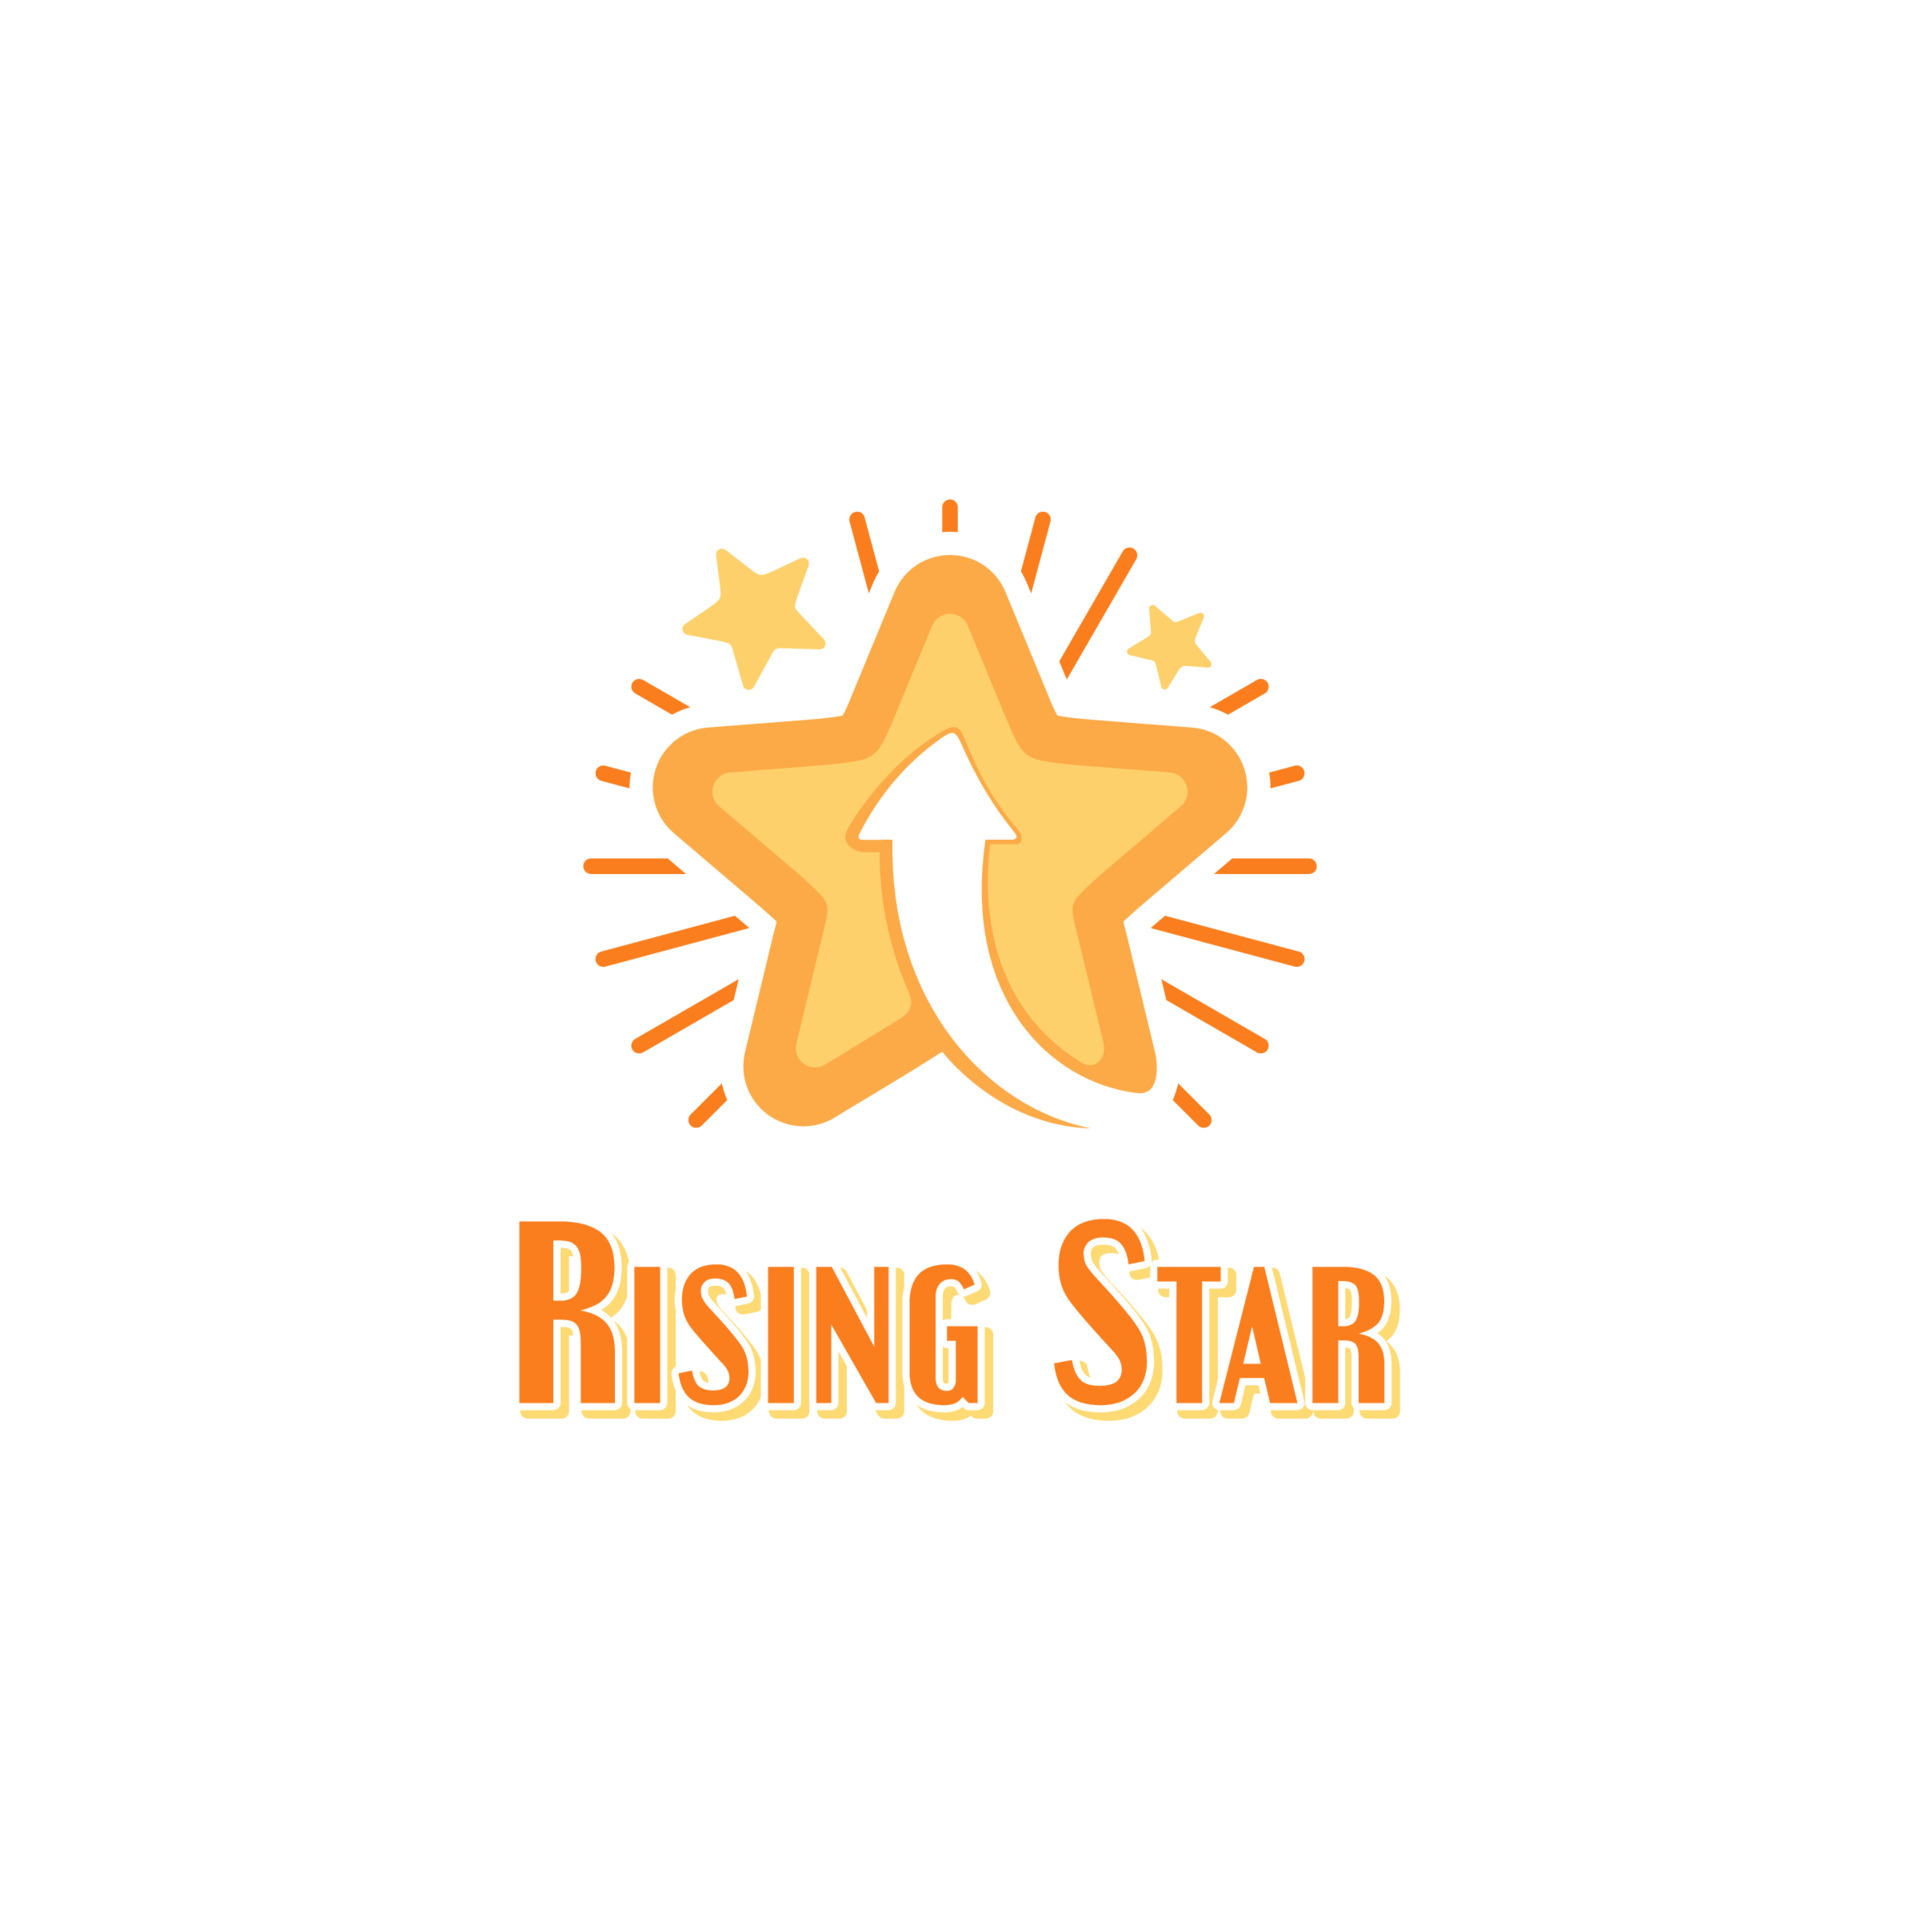 Rising Star Logo Vector Images (over 1,500)